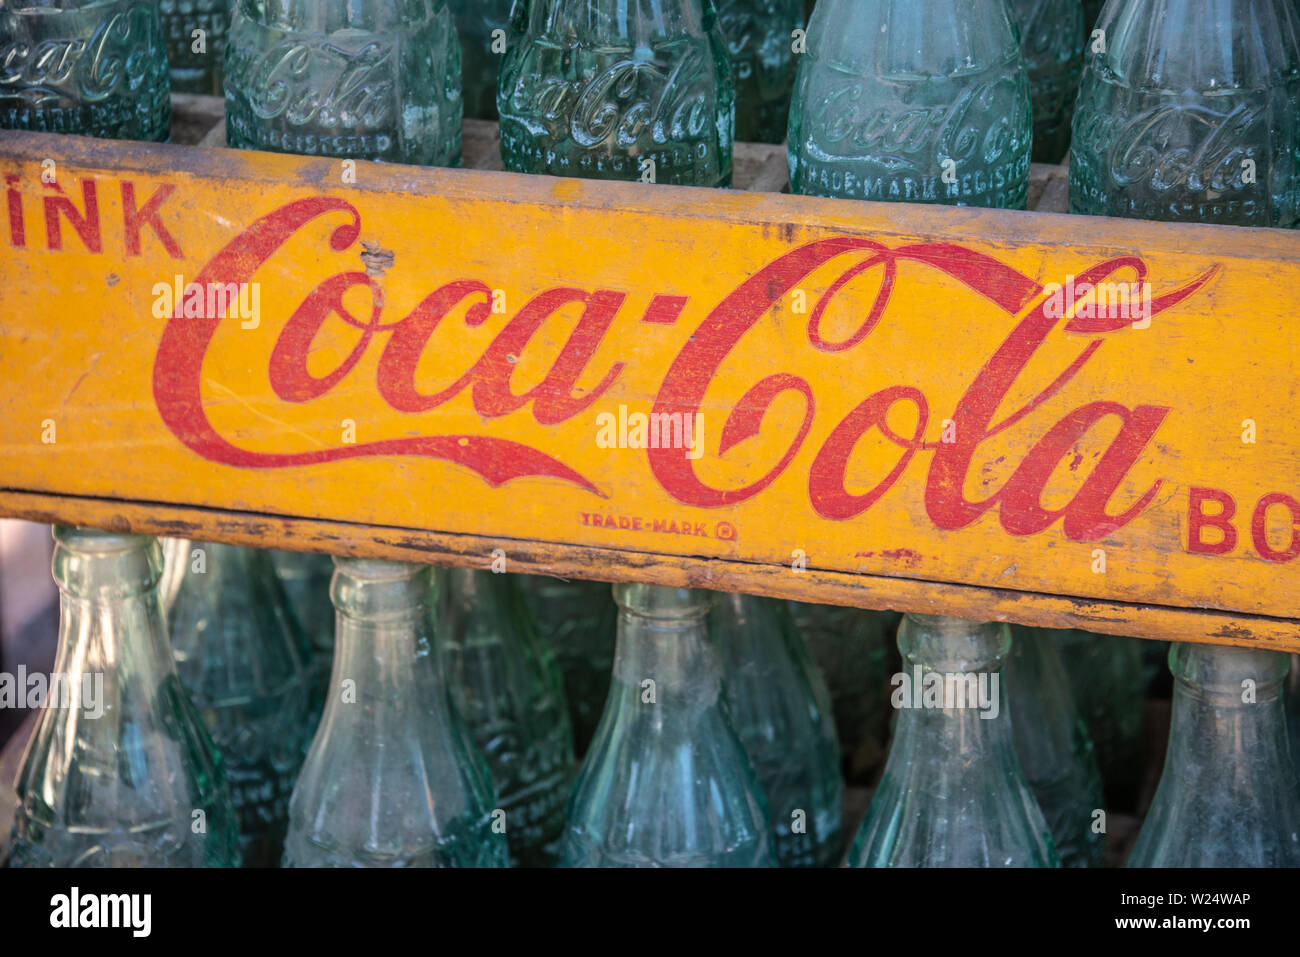 Vintage wooden Coca-Cola crate with glass Coca-Cola bottles. Stock Photo